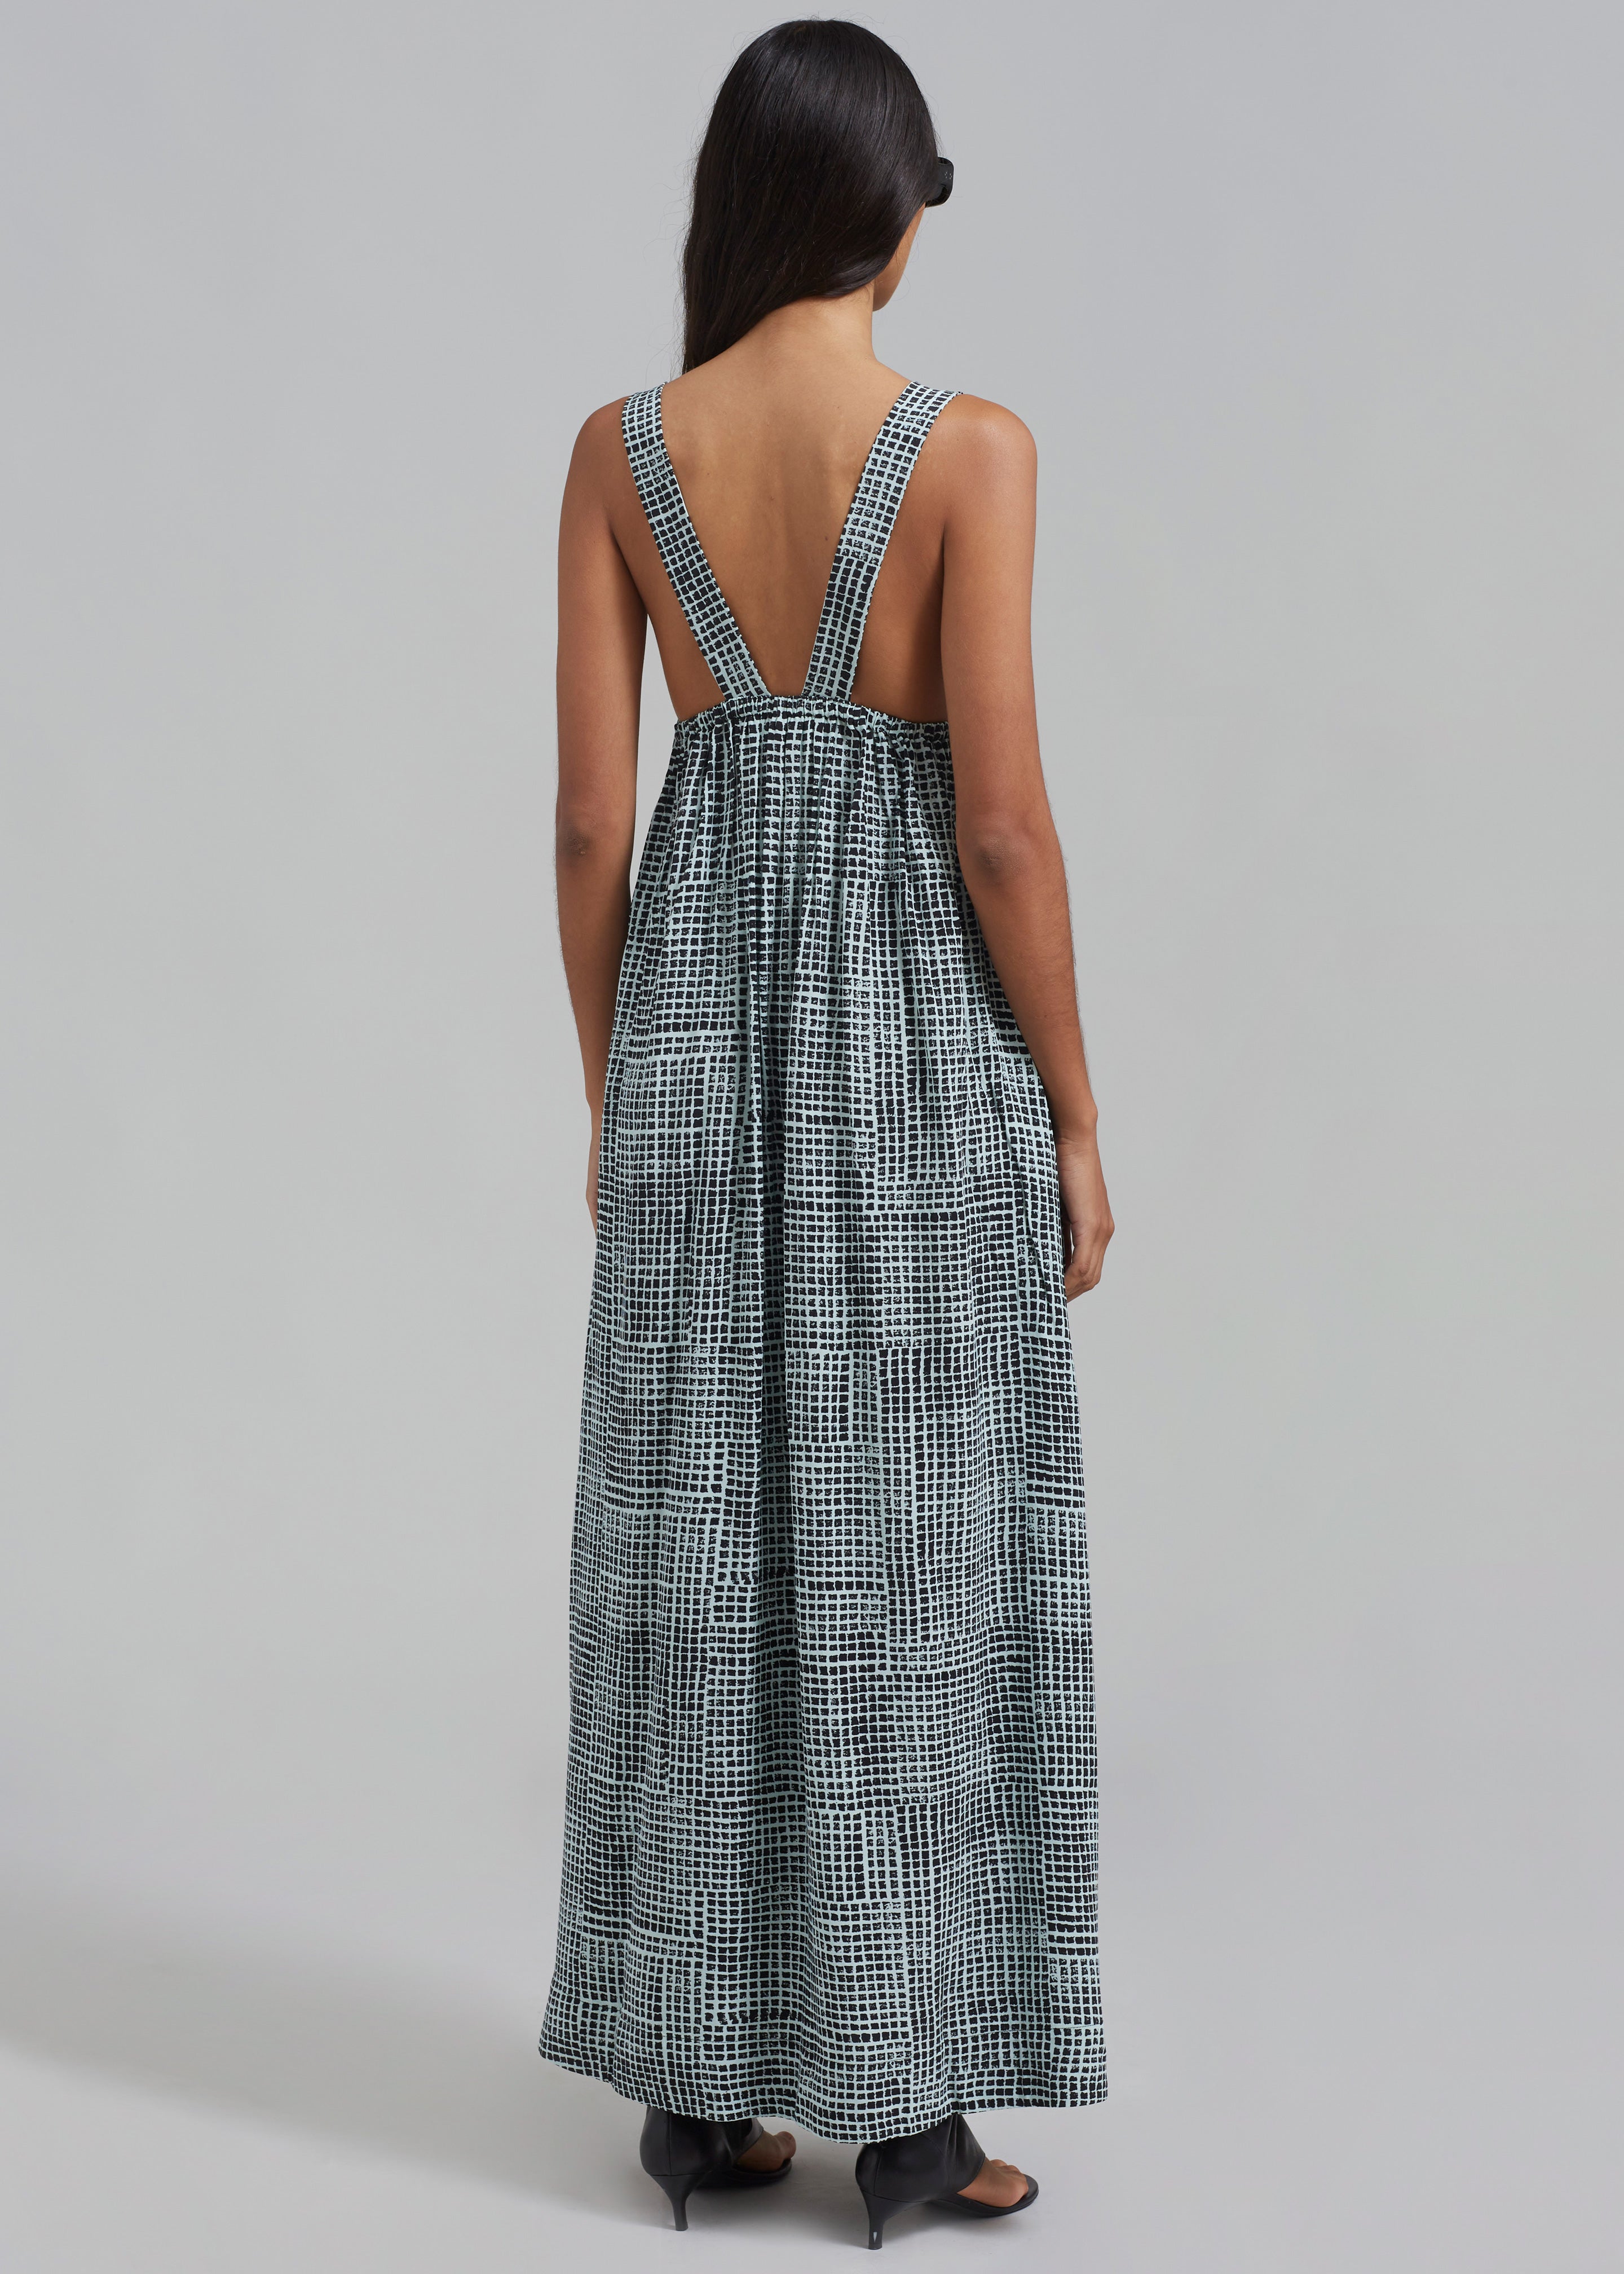 PROENZA SCHOULER WHITE LABEL Flou belted printed crepe maxi dress